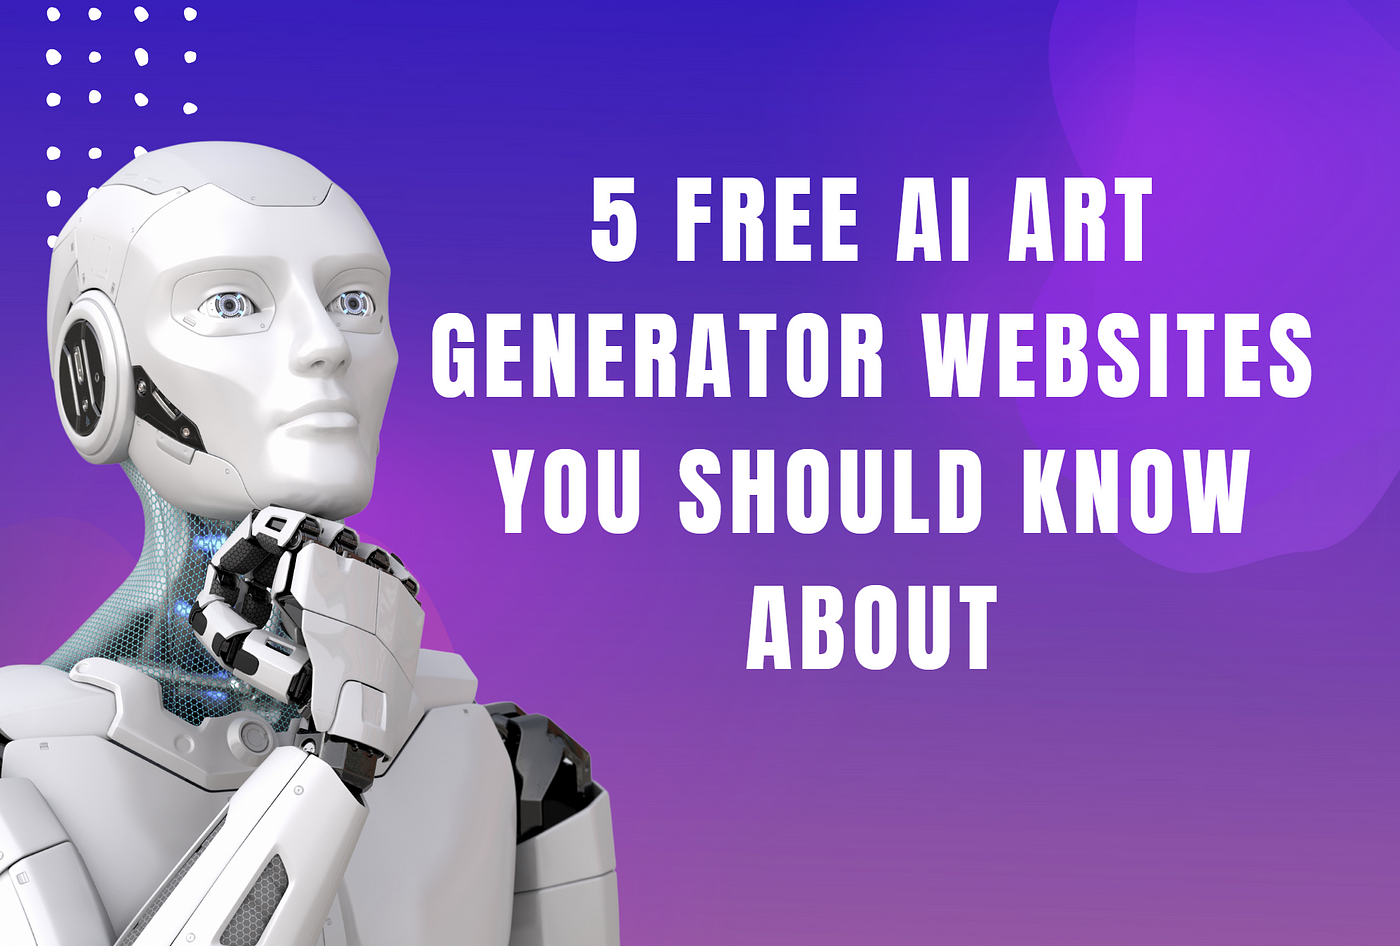 Top 5 FREE AI Art Generator Websites You Should Know About | by Jim Clyde  Monge | Geek Culture | Medium